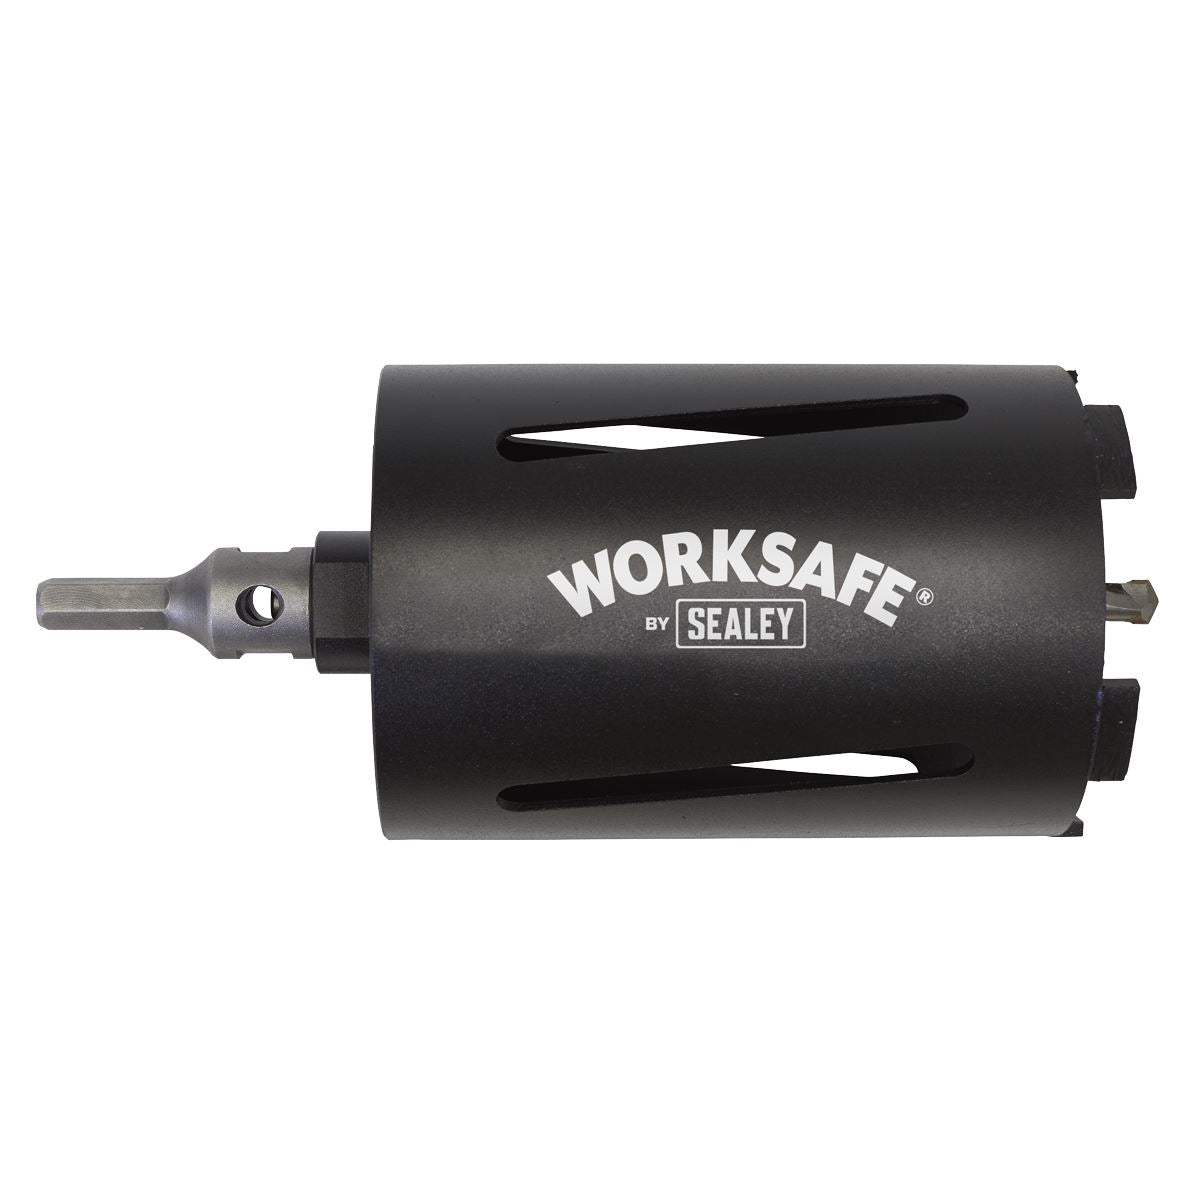 Worksafe by Sealey Core-to-Go Dry Diamond Core Drill Ø107mm x 150mm